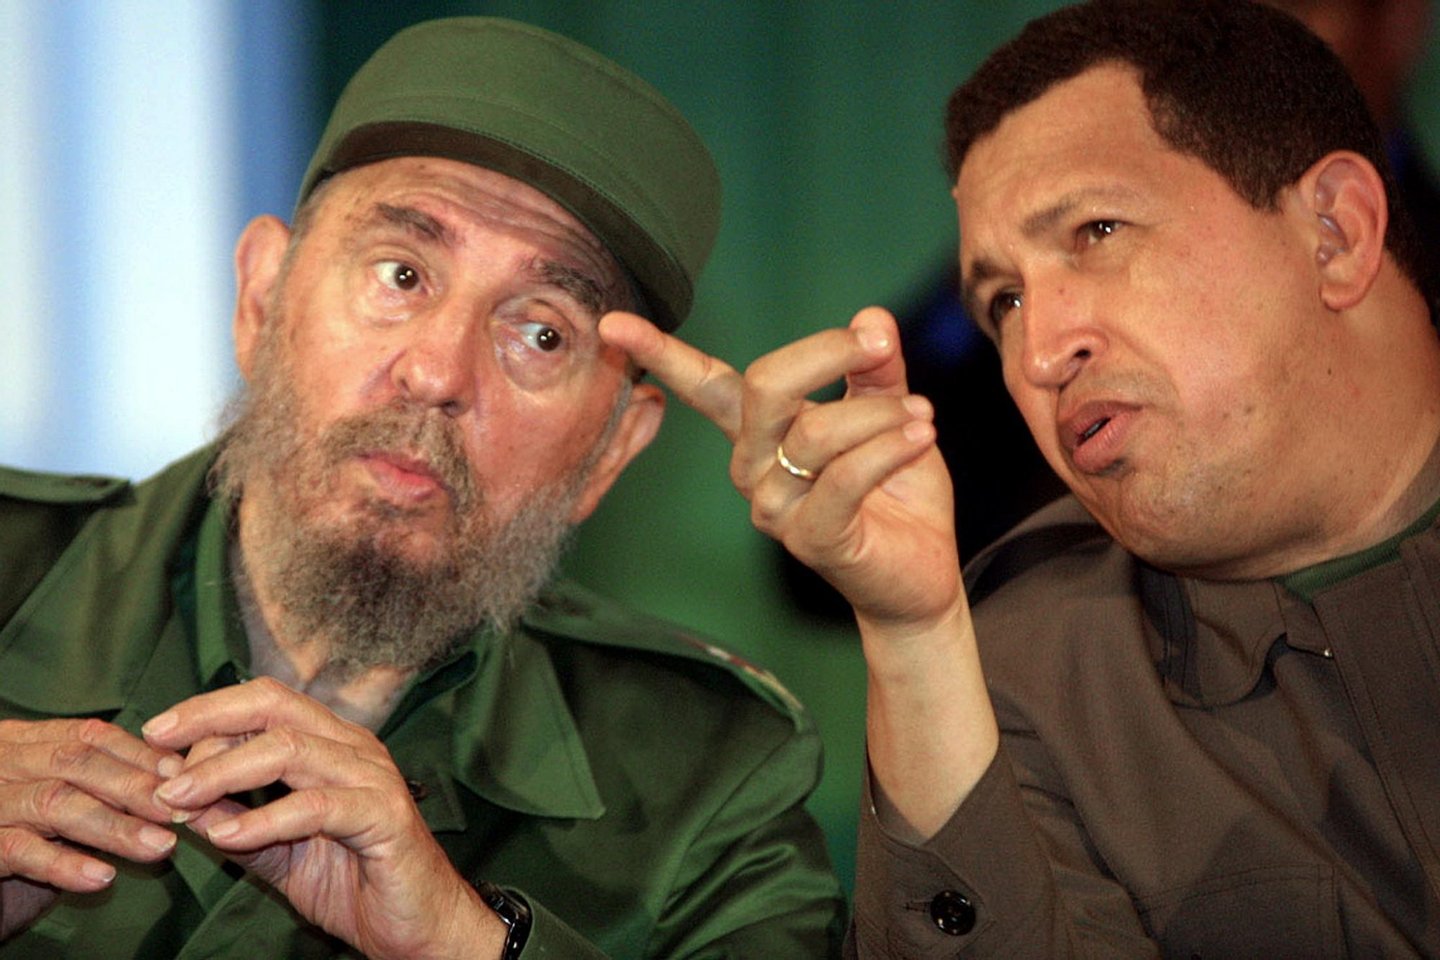 Cubano Fidel Castro (L) confers with Venezuelan President Hugo Chavez (R) 11 August 2001 in Bolivar City. Castro is visiting Venezuela to strengthen ties with Chavez, who has shown a keen interest in taking lessons from the Cuban president on introducing sweeping social change. Castro, who will turn 75 in two days after 42 years in power, arrived at Maiquetia airport outside Caracas on his sixth trip to Venezuela but his third since the charismatic Chavez, 47, took the president's post in February 1999. AFP PHOTO/ANDREW ALVAREZ (Photo credit should read ANDREW ALVAREZ/AFP/Getty Images)